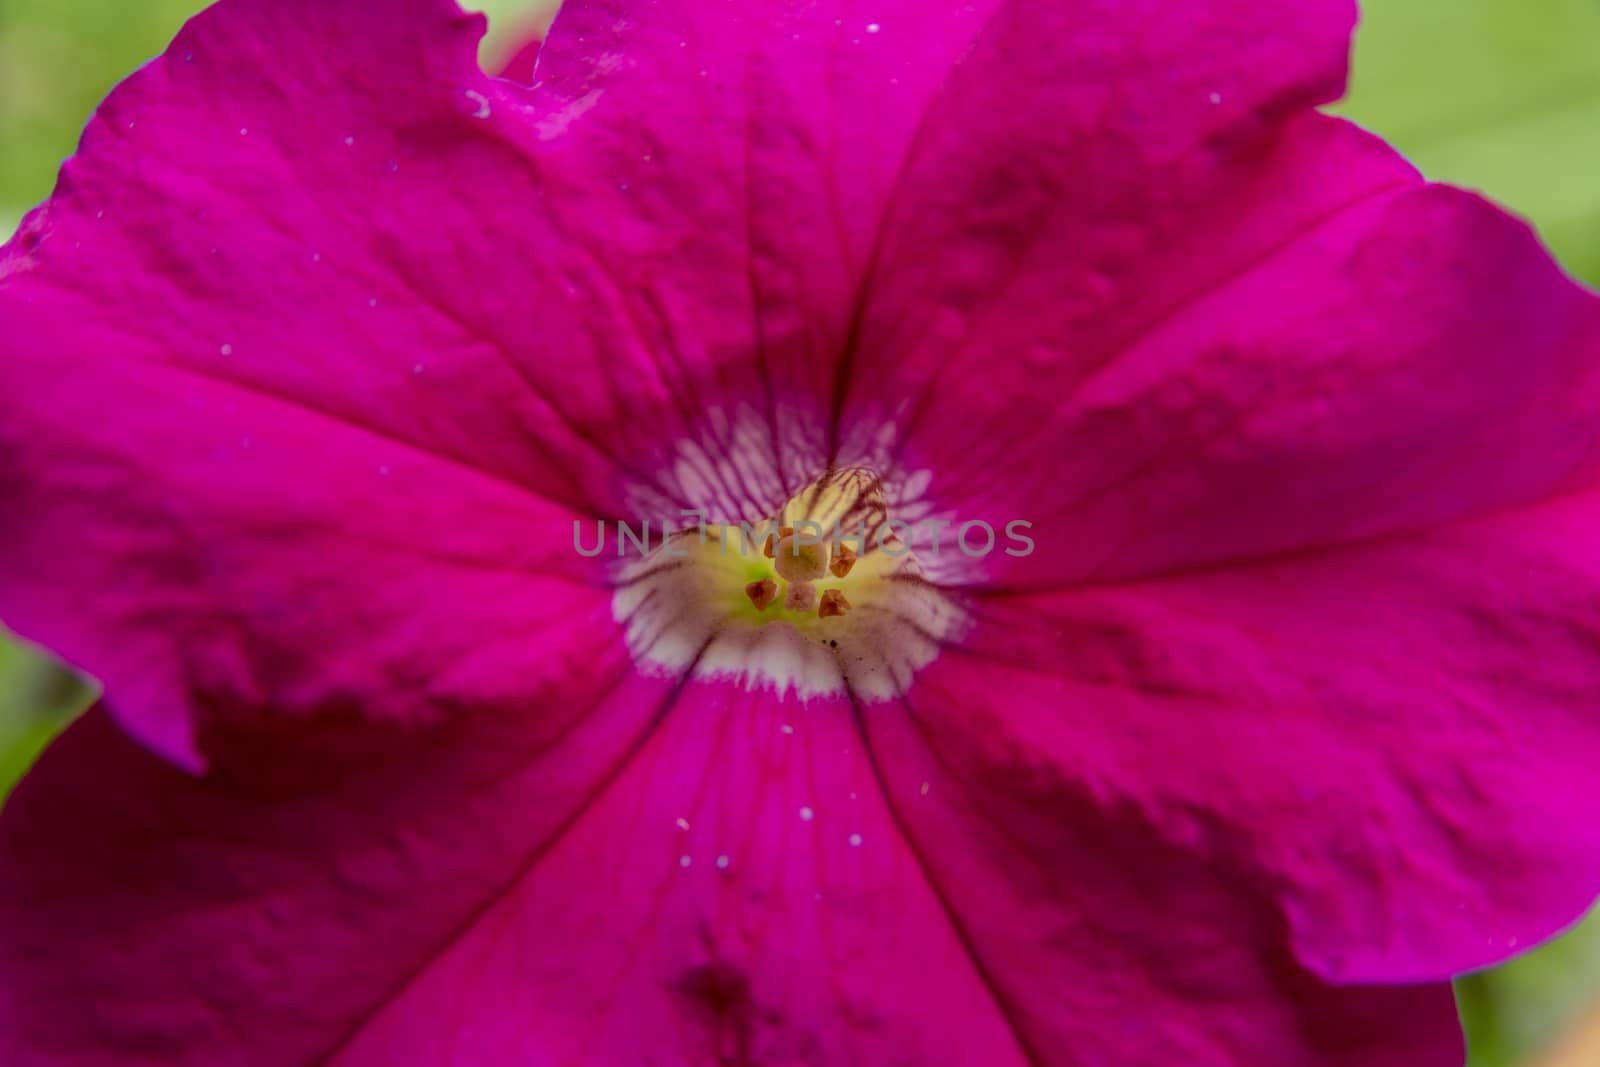 Closeup of pink Petunia flower with Stigma pistillum and Anther androecium. Flower in nature.